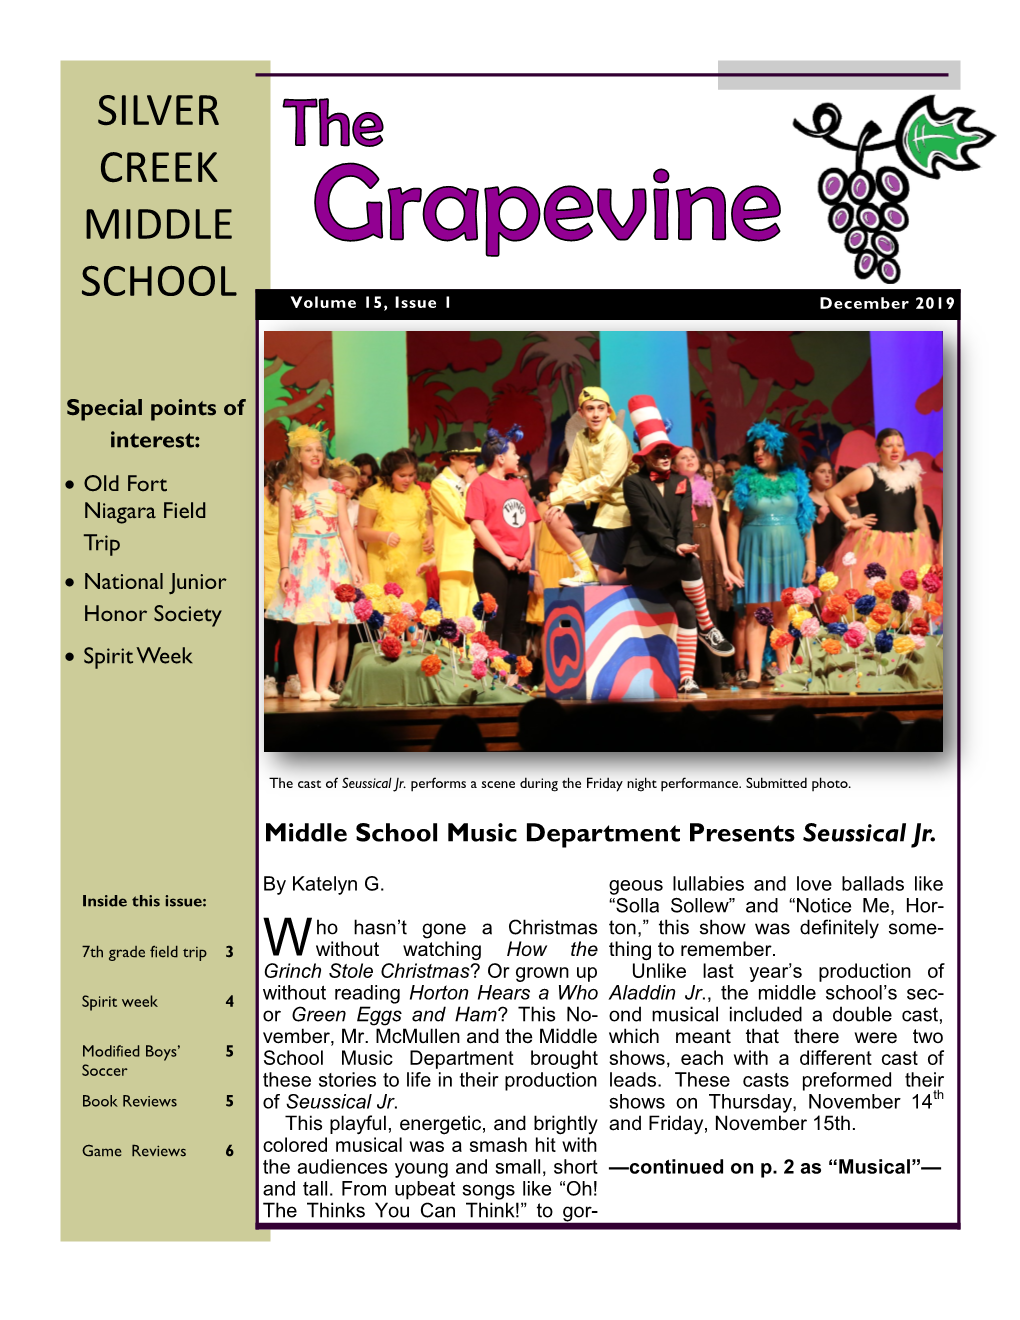 SILVER CREEK MIDDLE SCHOOL Volume 15, Issue 1 December 2019